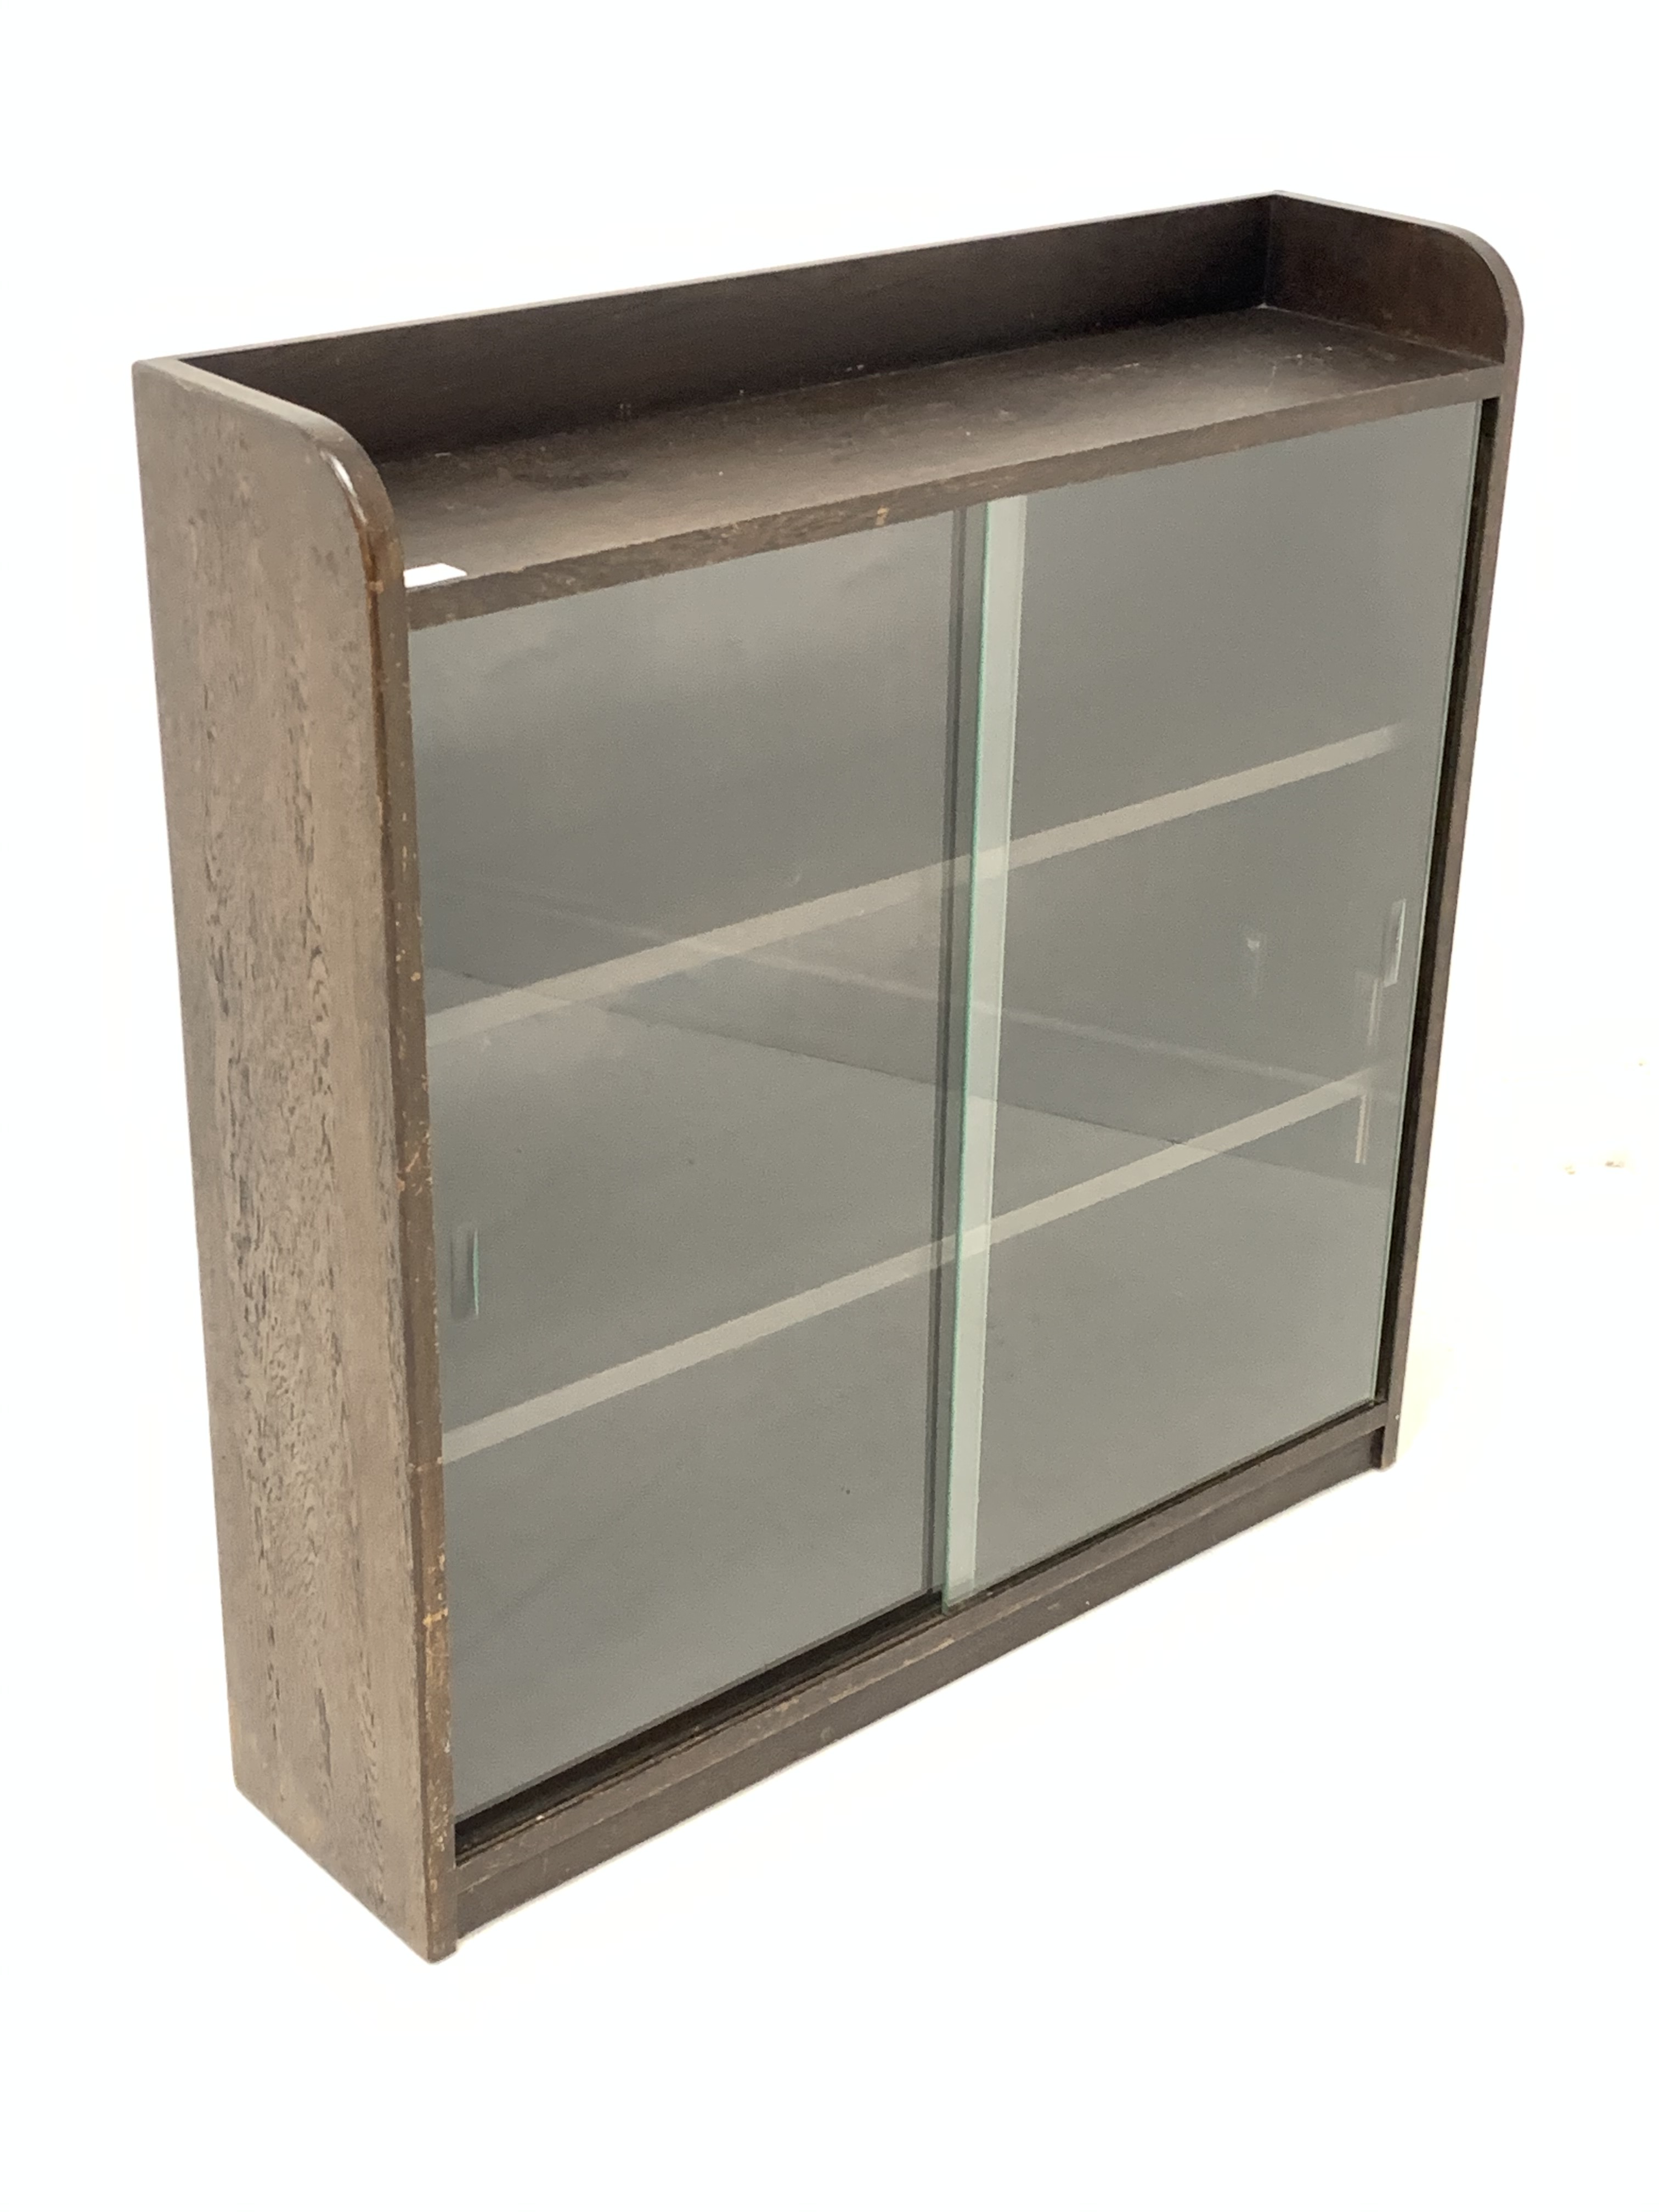 Phoenix Galleries 'Criterion' stained oak bookcase, with sliding glass doors enclosing two shelves, - Image 2 of 4